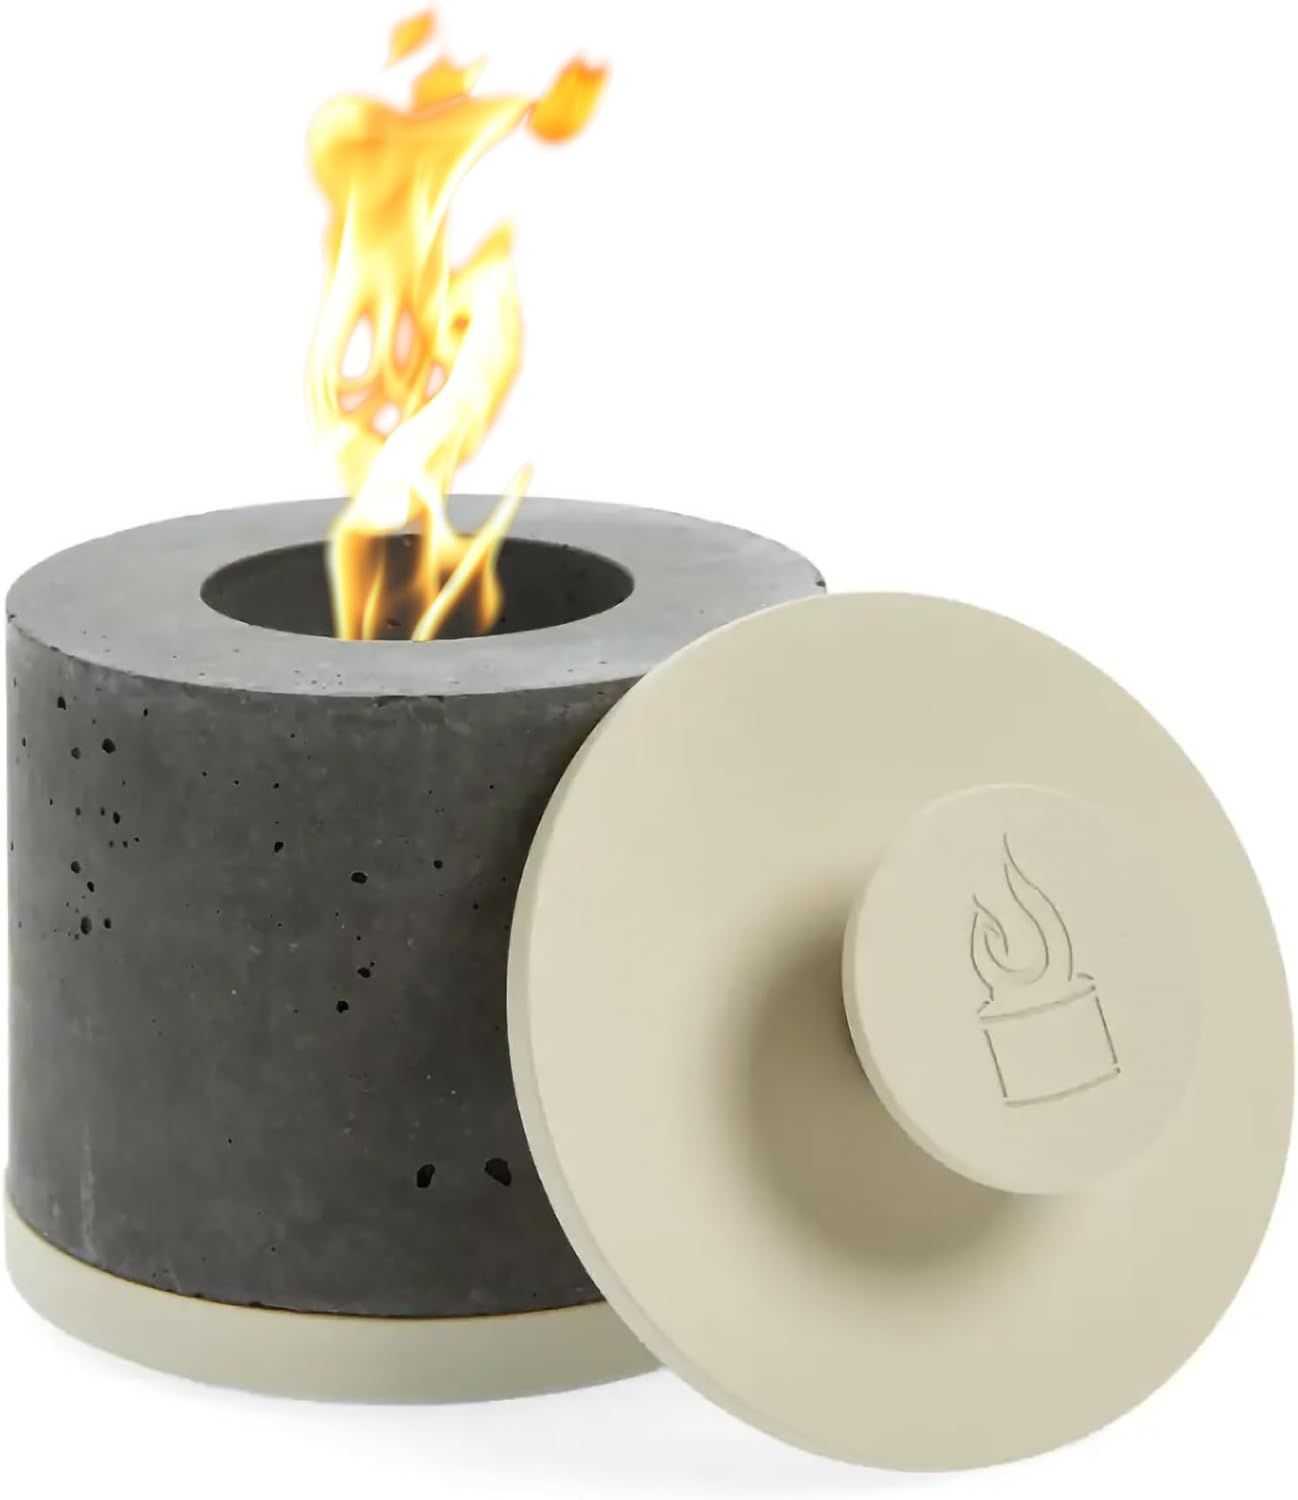 FLIKR Fire Personal Concrete Fireplace – Tabletop Smokeless Fire Pit with Fire Pit Snuffer Lid ... | Amazon (US)